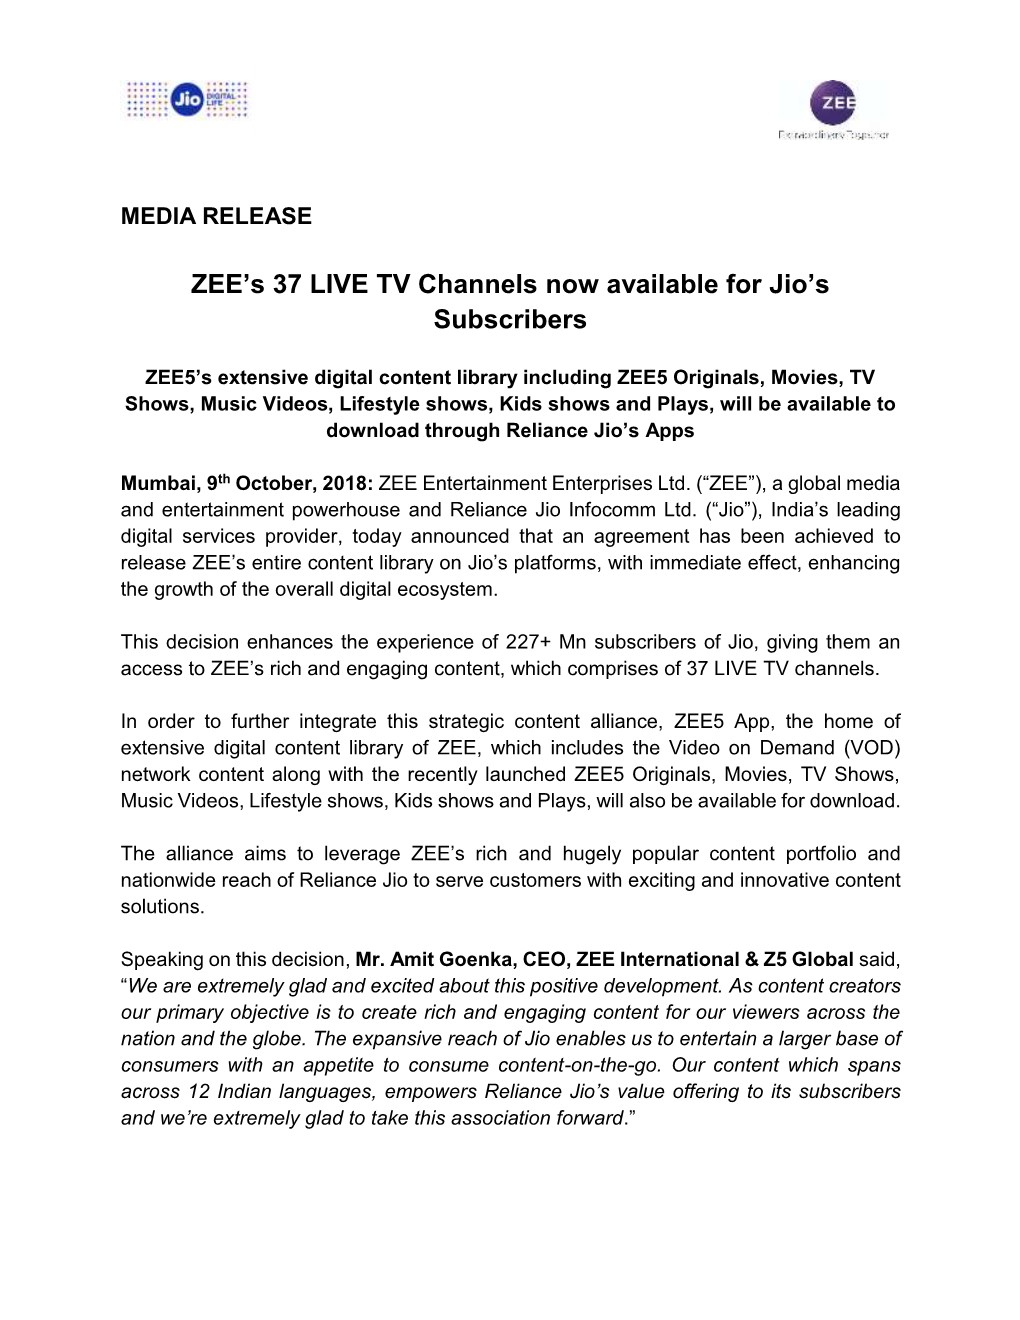 ZEE's 37 LIVE TV Channels Now Available for Jio's Subscribers